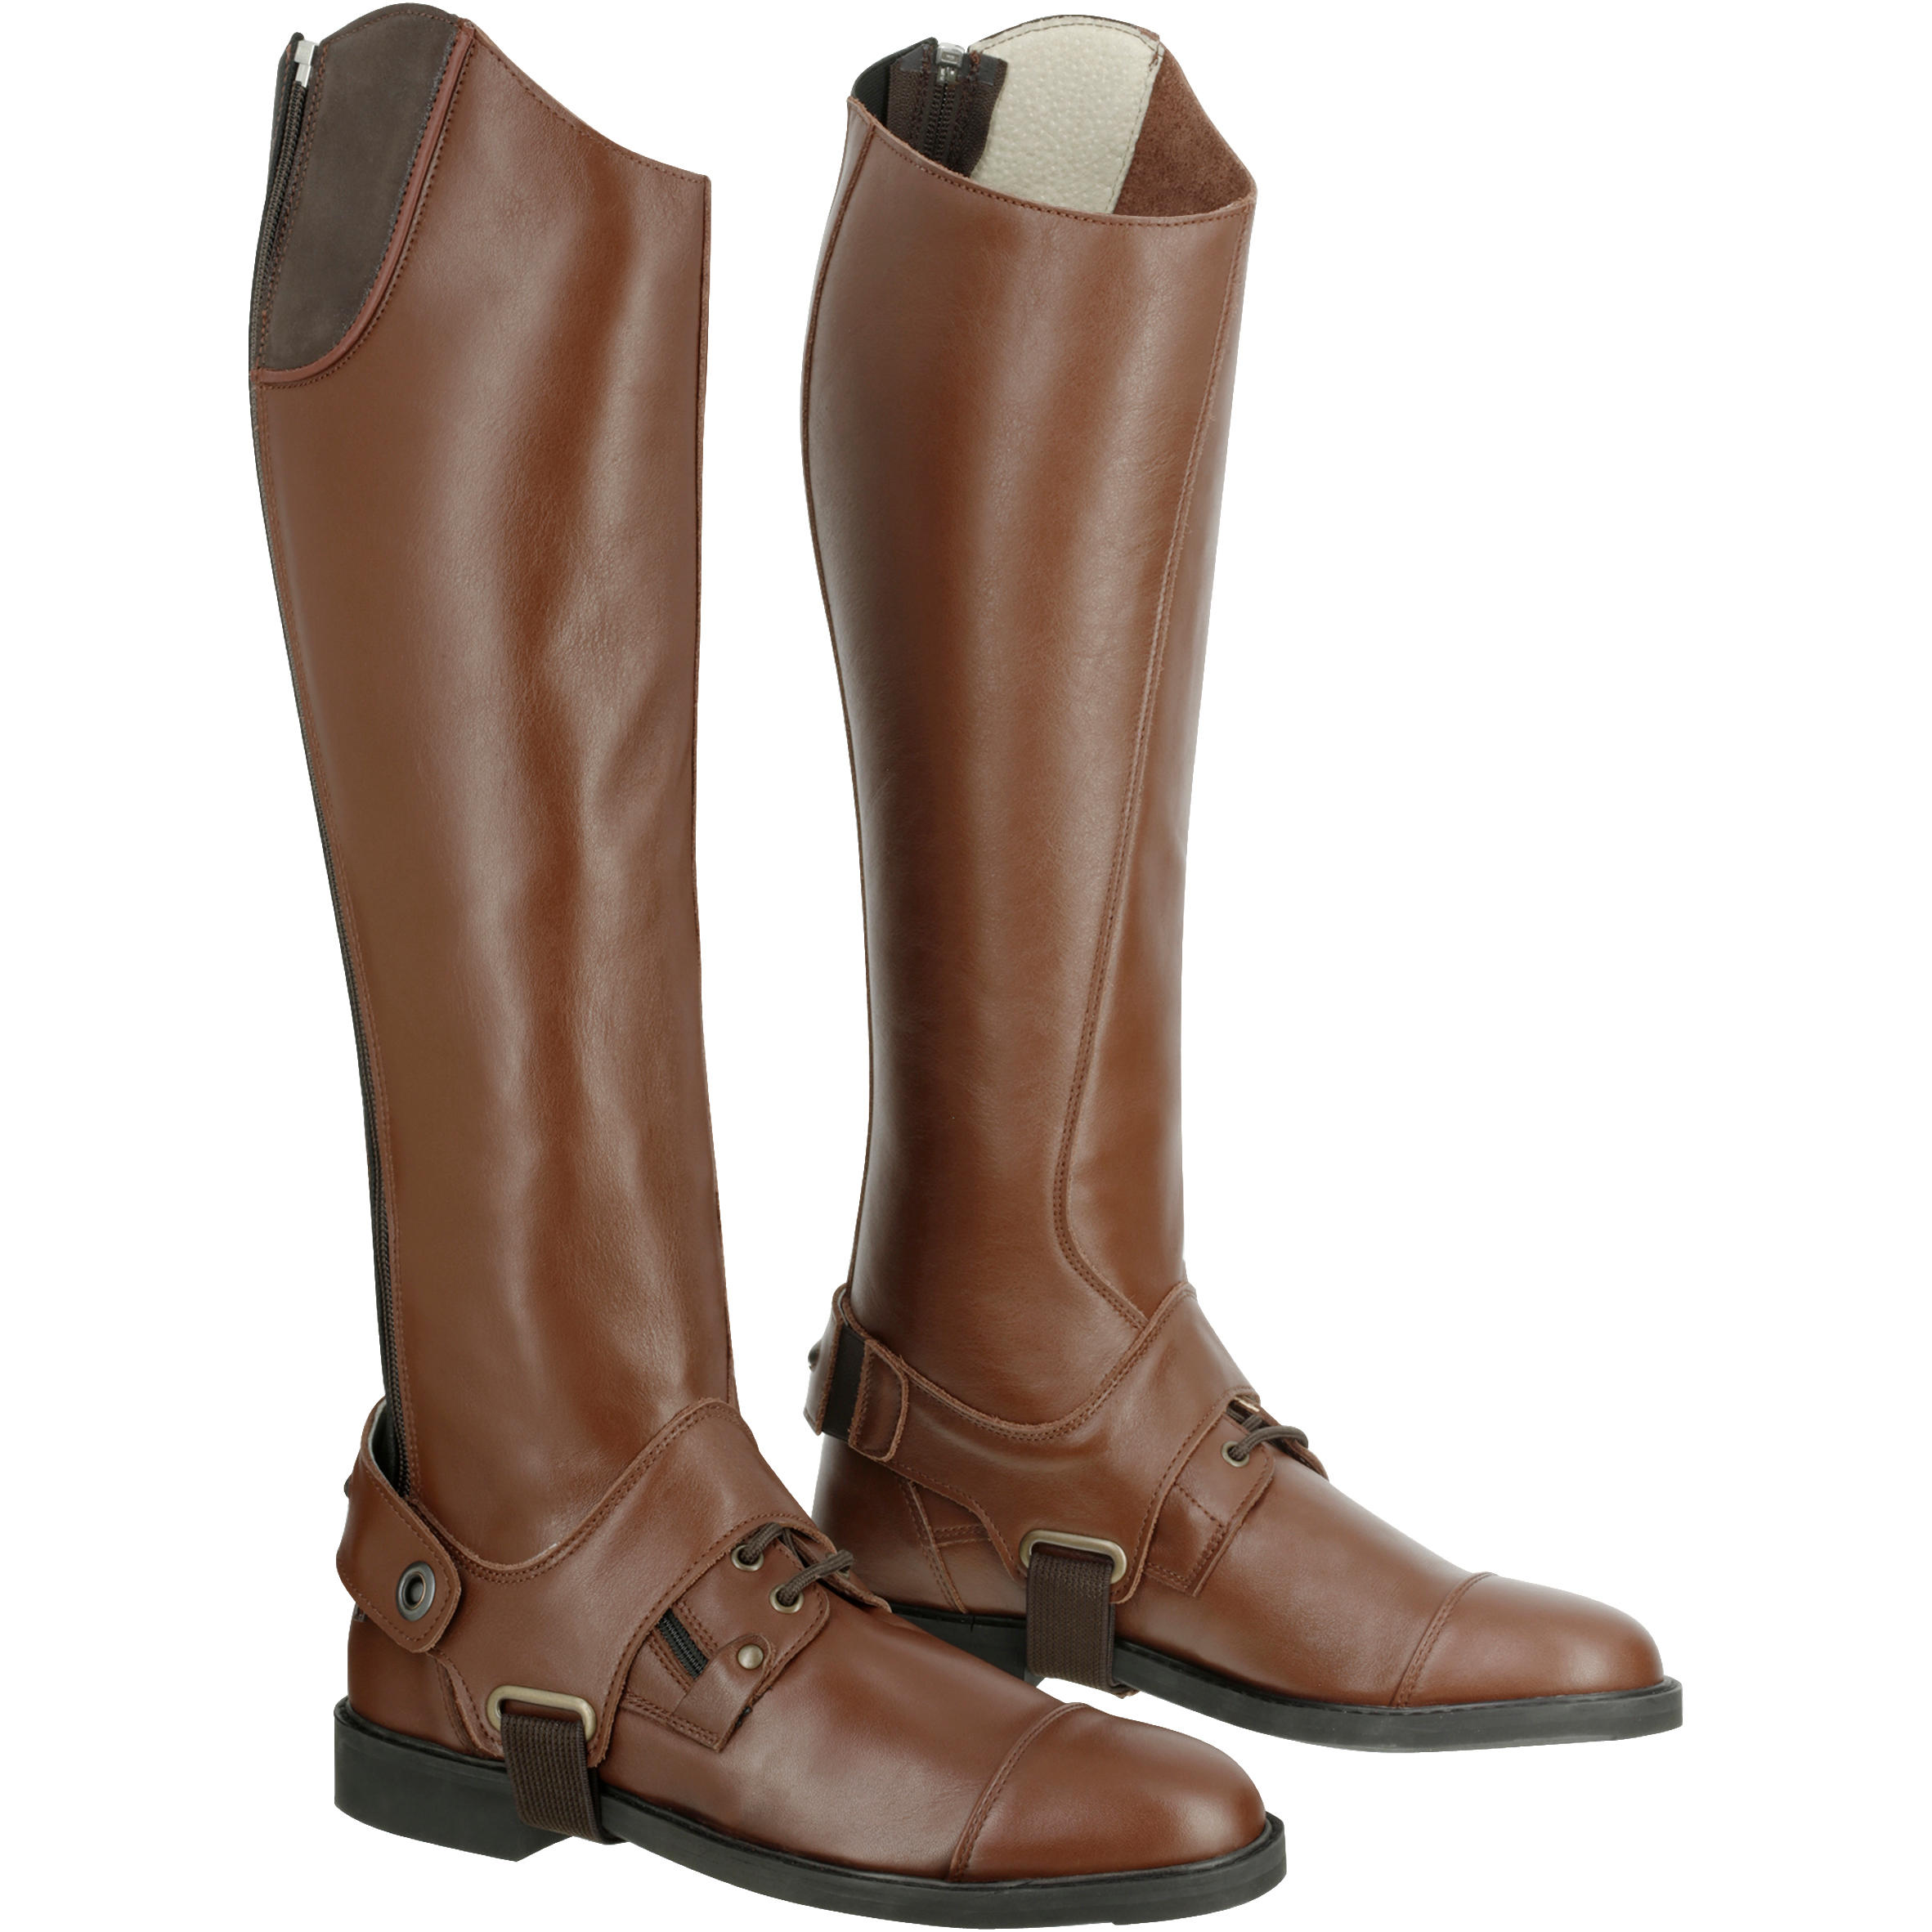 Training 700 Adult Leather Horse Riding Half Chaps - Brown 3/11